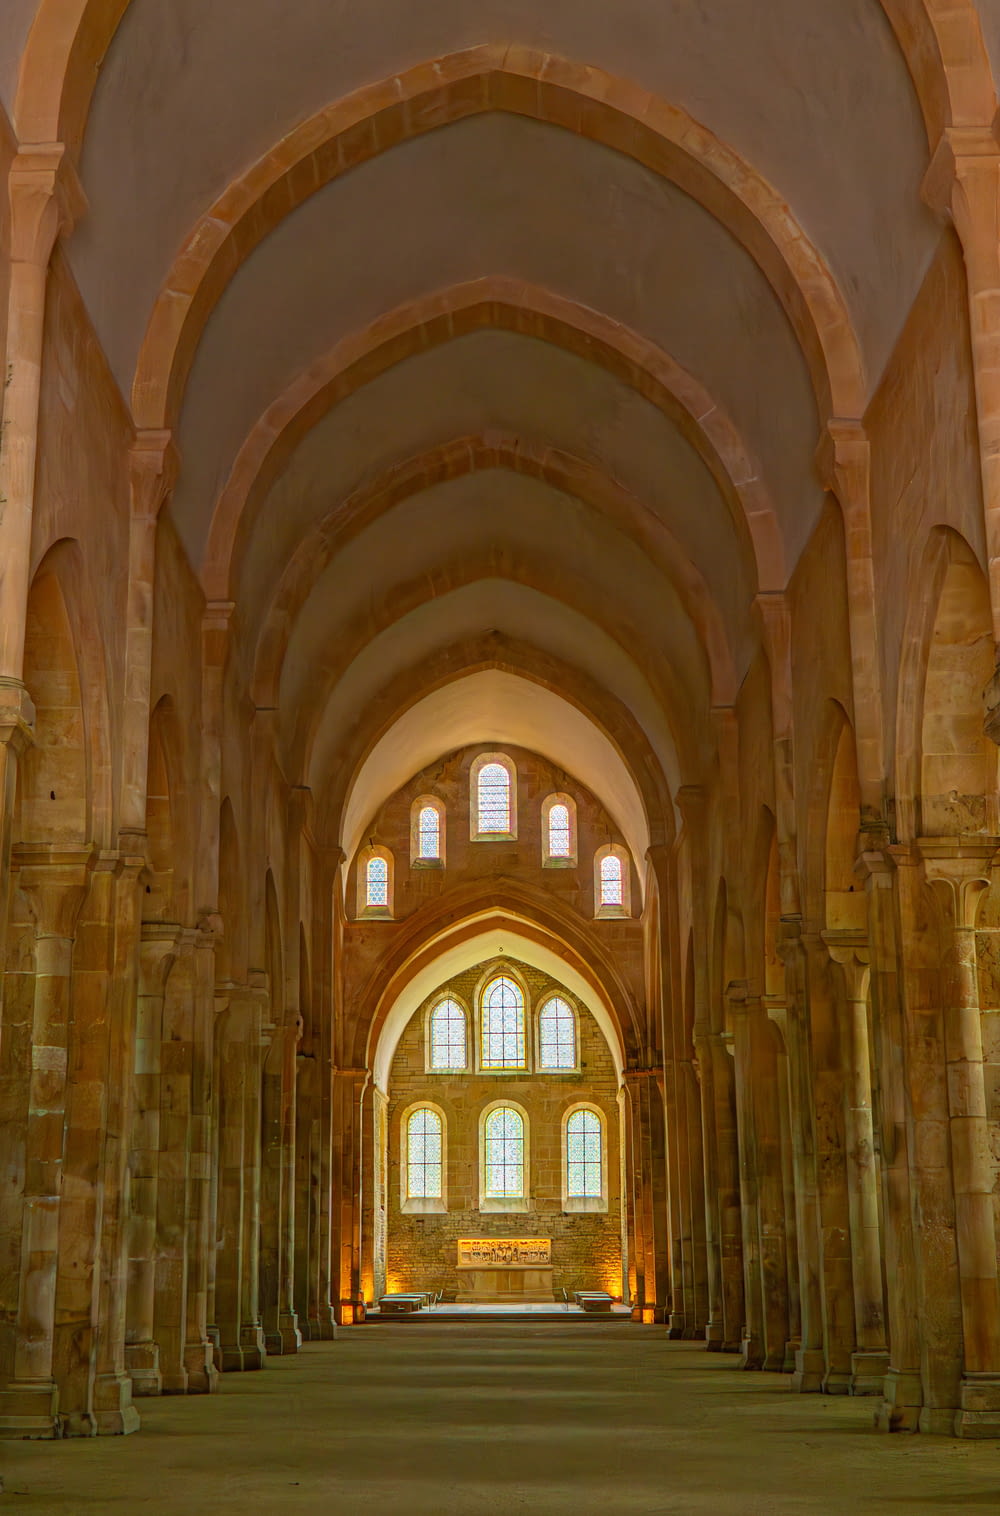 a large cathedral with stone columns and arches